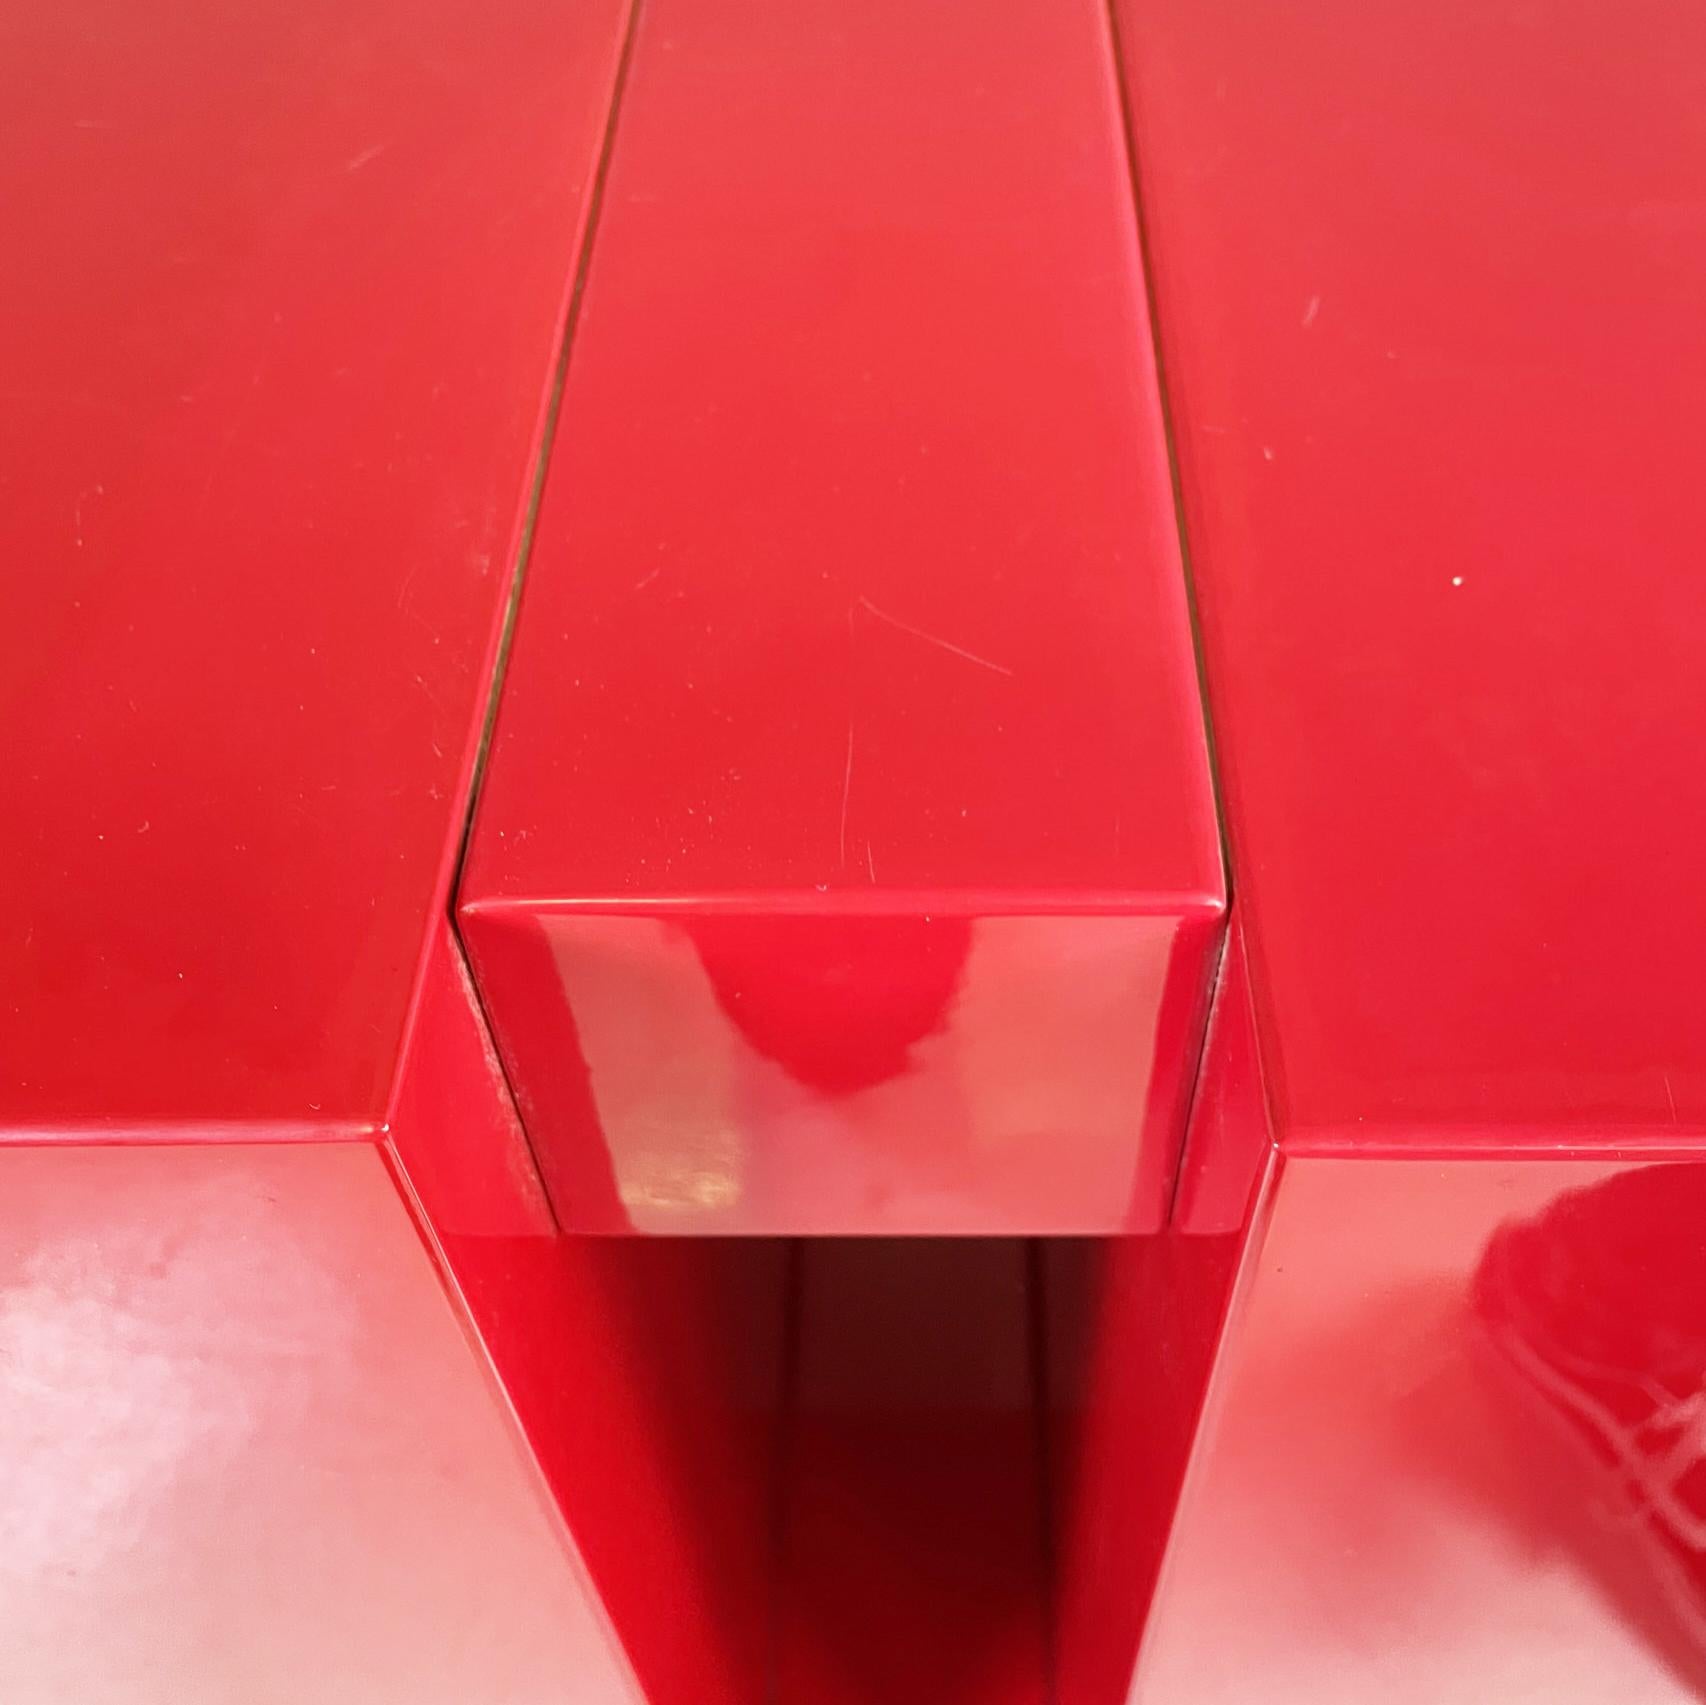 Italian Midcentury Geometric Pedestal in Red Lacquered Wood, 1980s For Sale 2